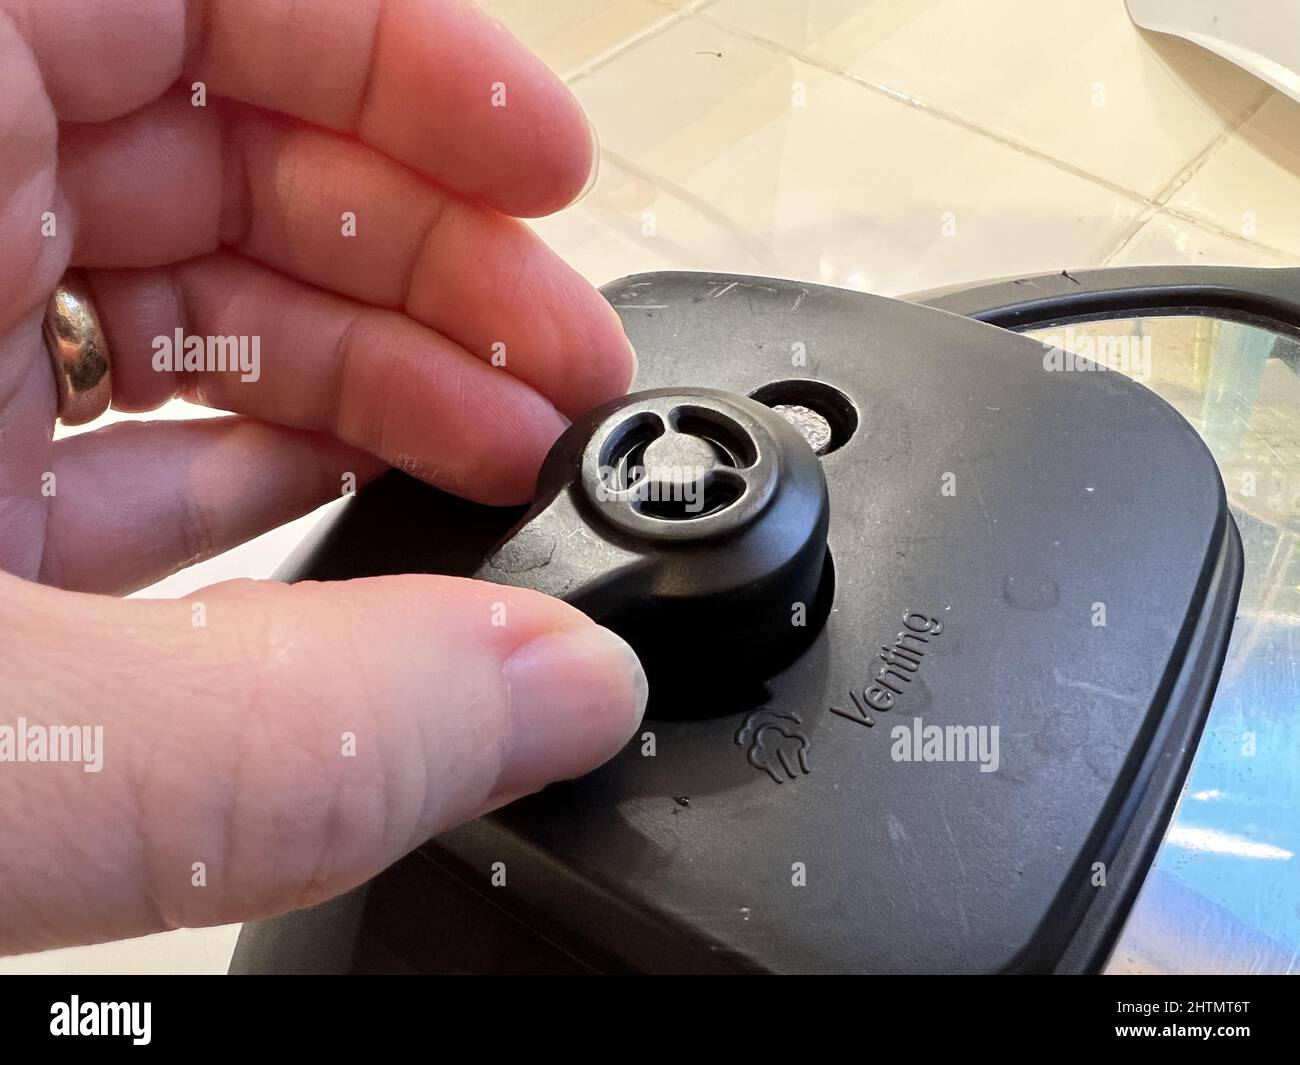 A person's hand adjusts the pressure valve on an Instant Pot pressure cooker,  Lafayette, California, February 8, 2022. Photo courtesy Sftm Stock Photo -  Alamy